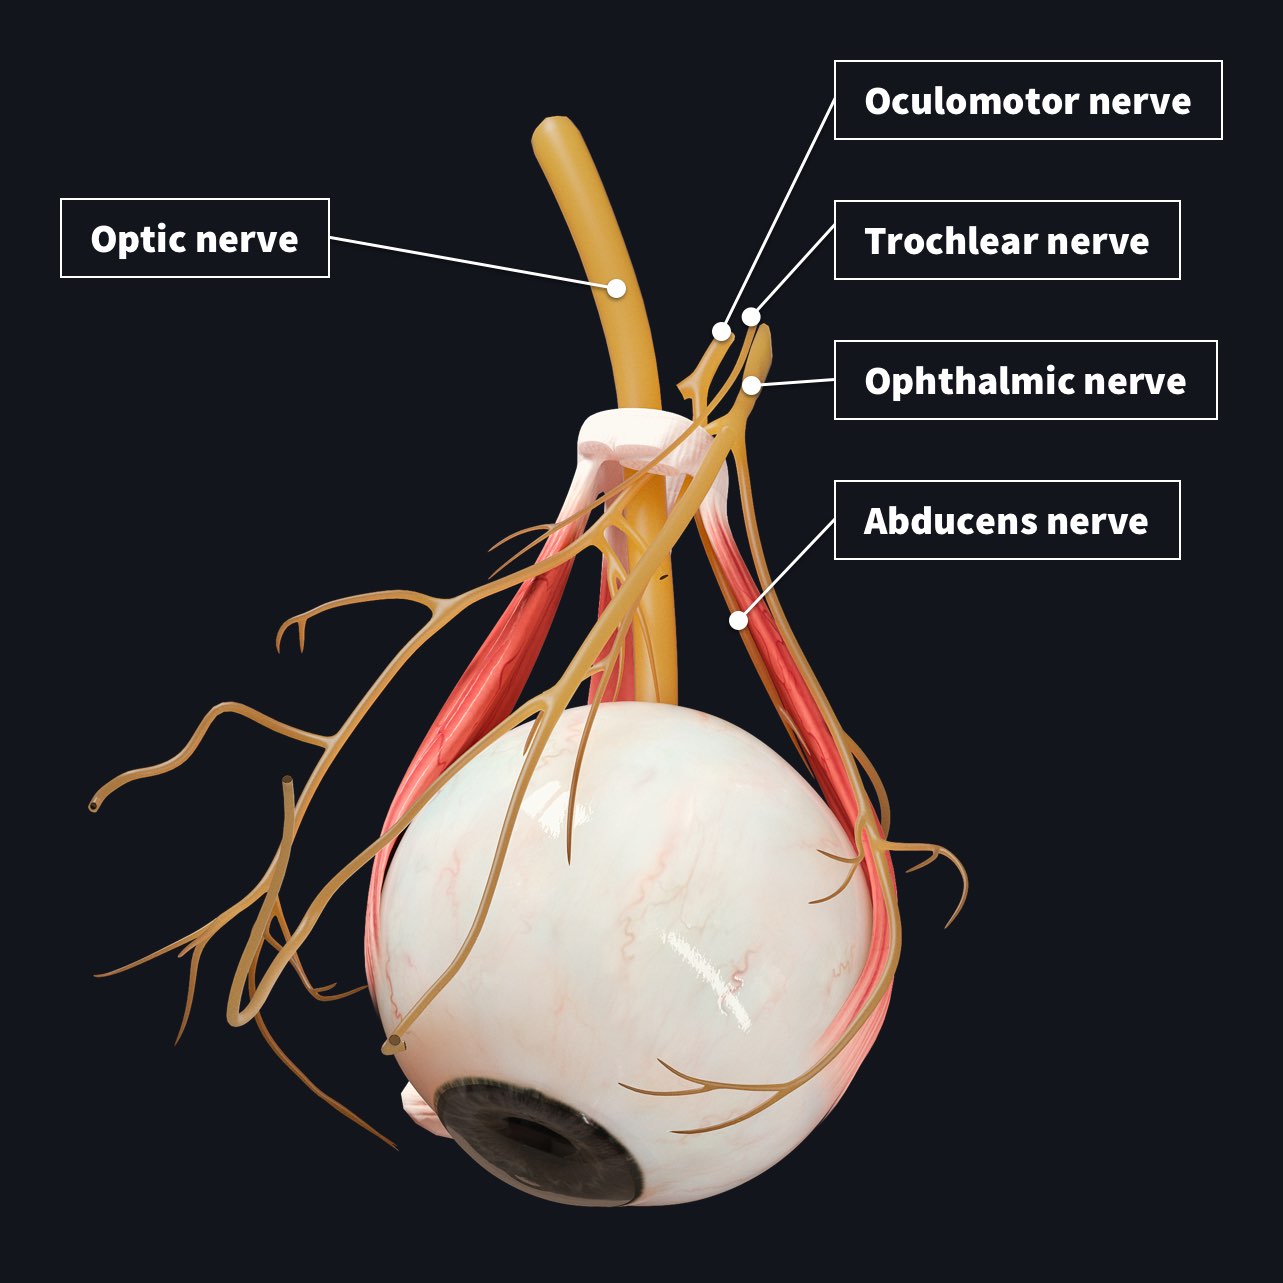 The nerves that innervate the eye with the optic nerve, oculomotor nerve, trochlear nerve, ophthalmic nerve and abducens nerve labelled